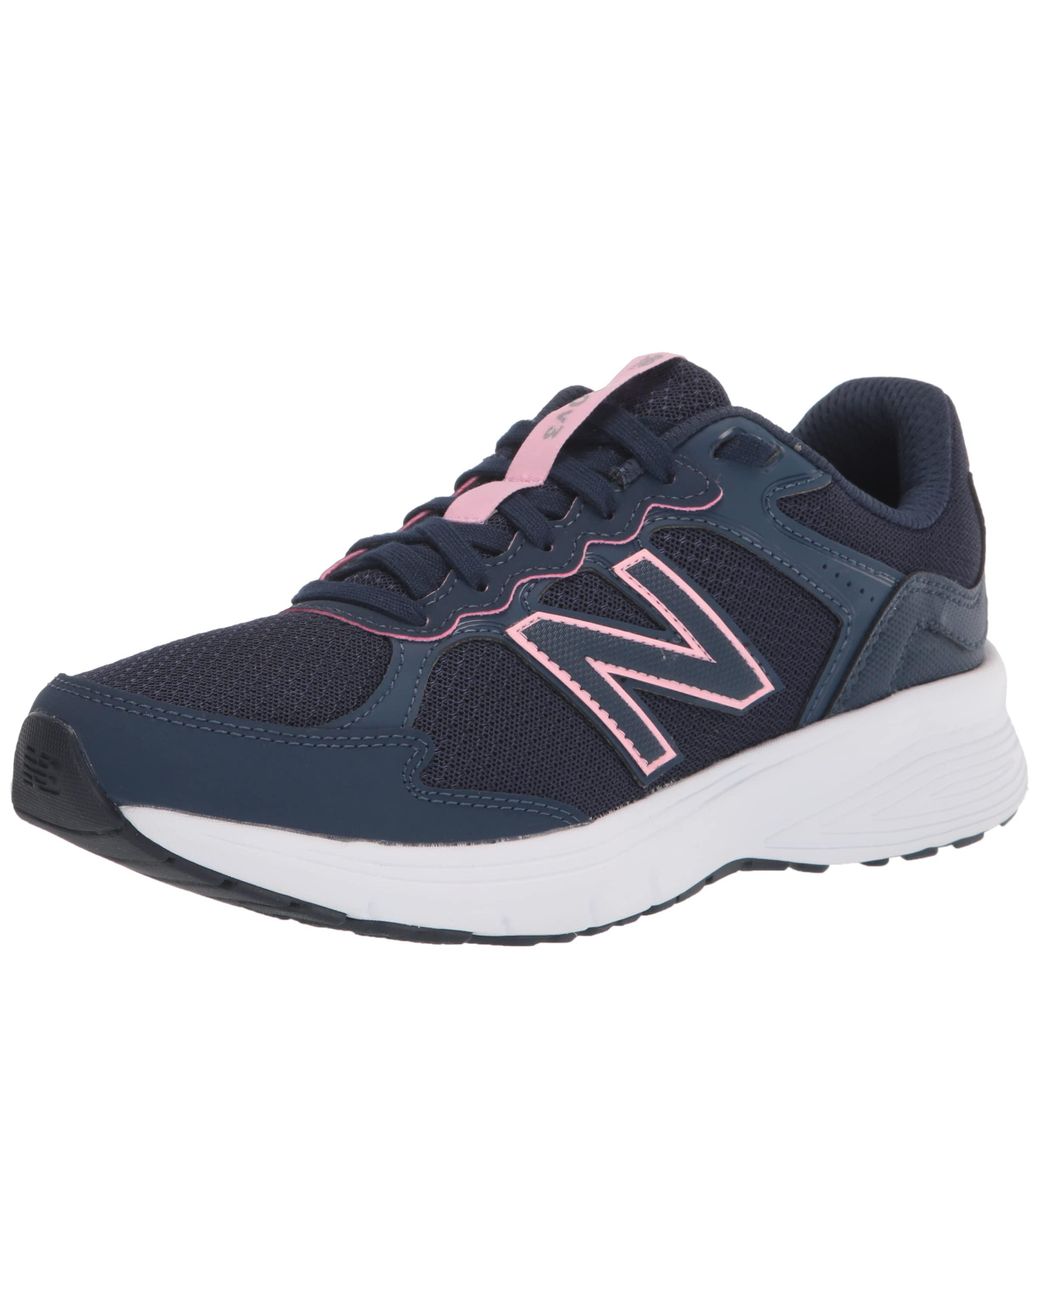 New Balance Rubber 460 V3 Running Shoe in Navy/Pink (Blue) | Lyst